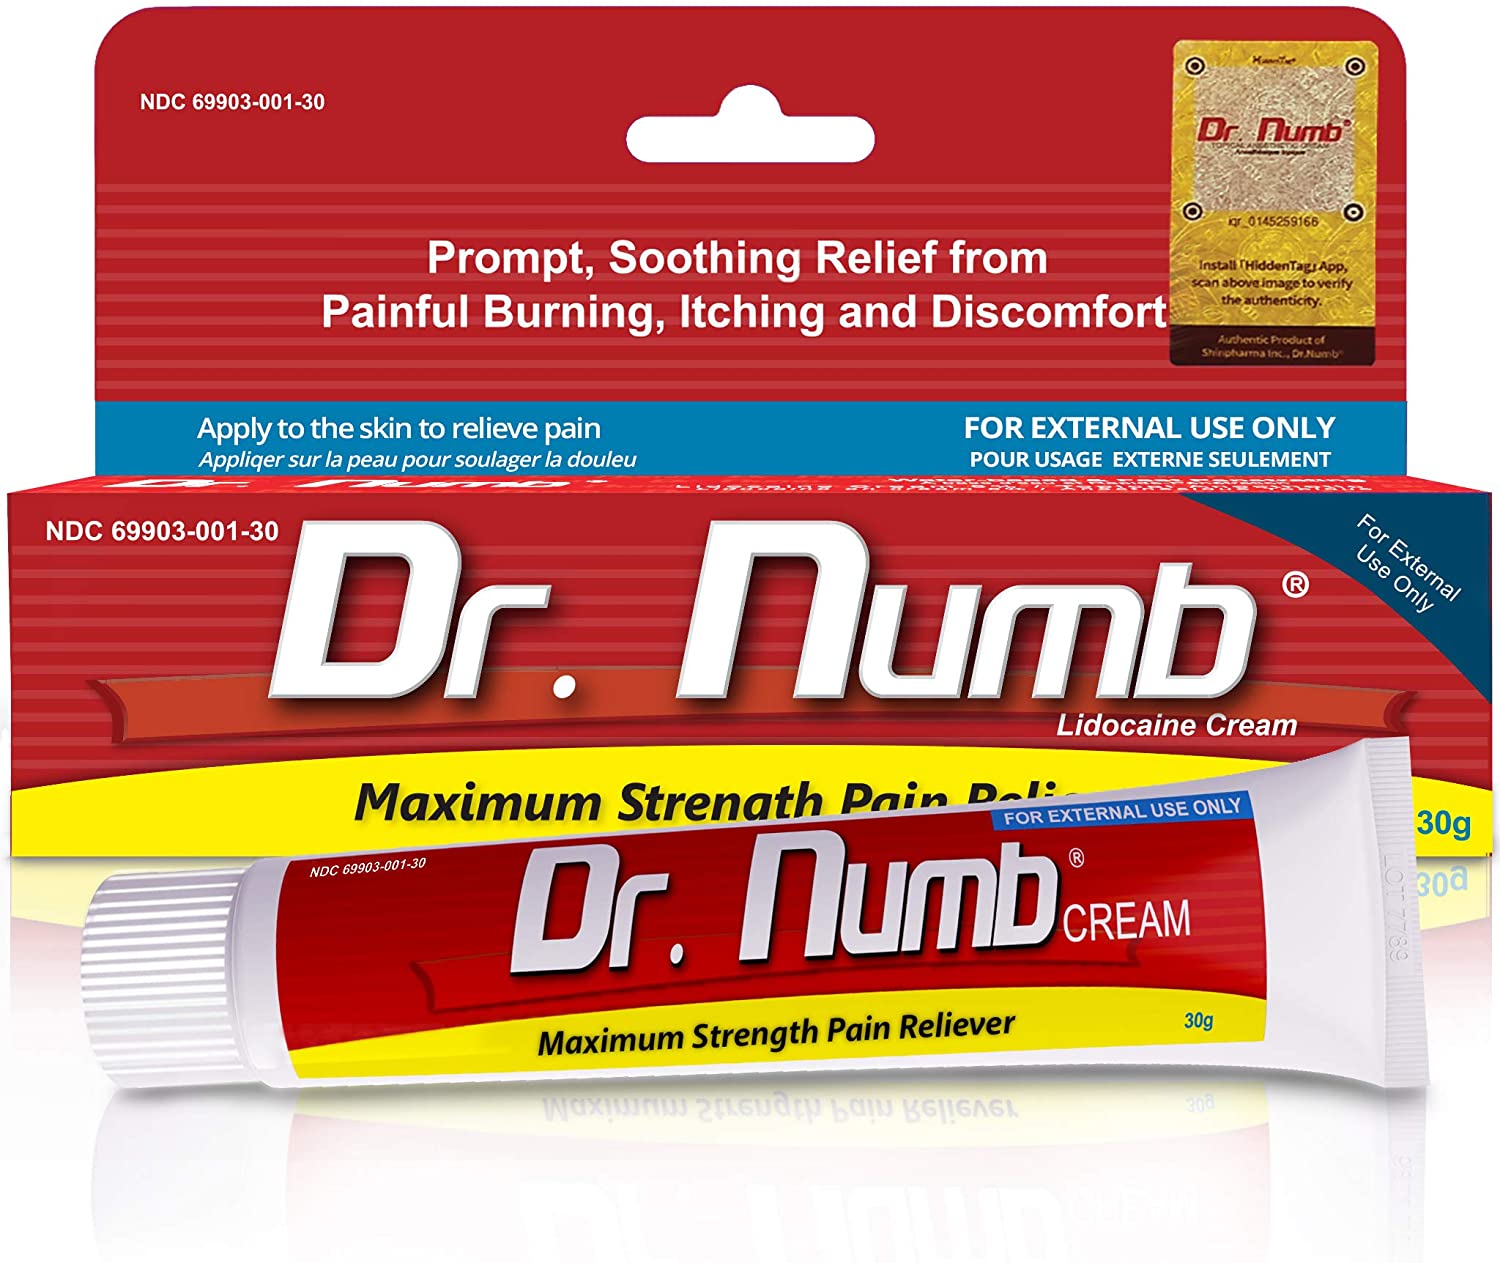 Why People Consider Using Numbing Cream?